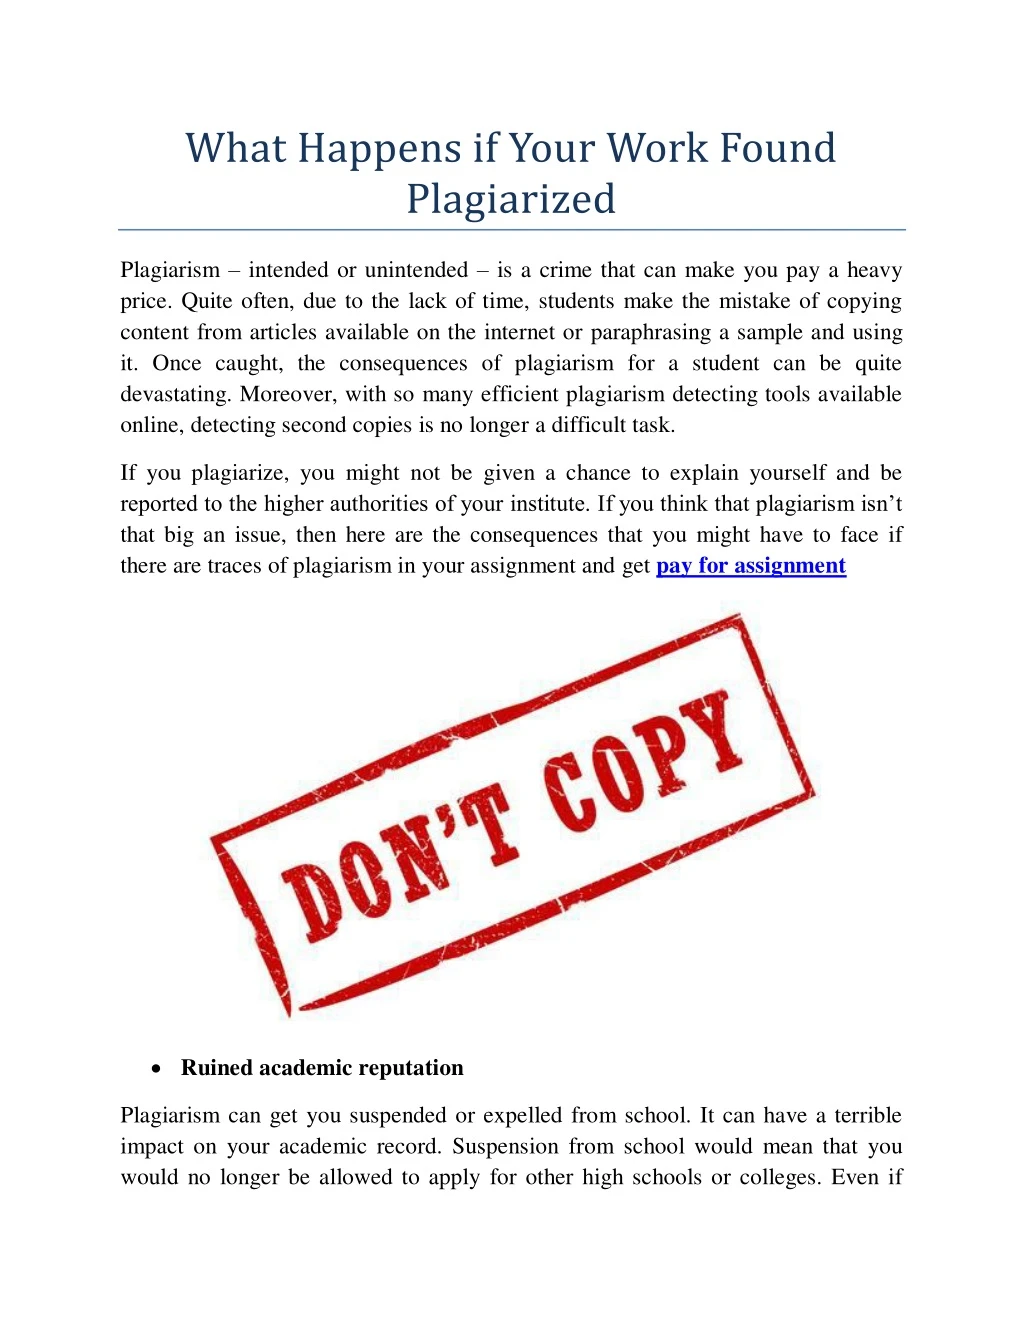 what happens if your work found plagiarized